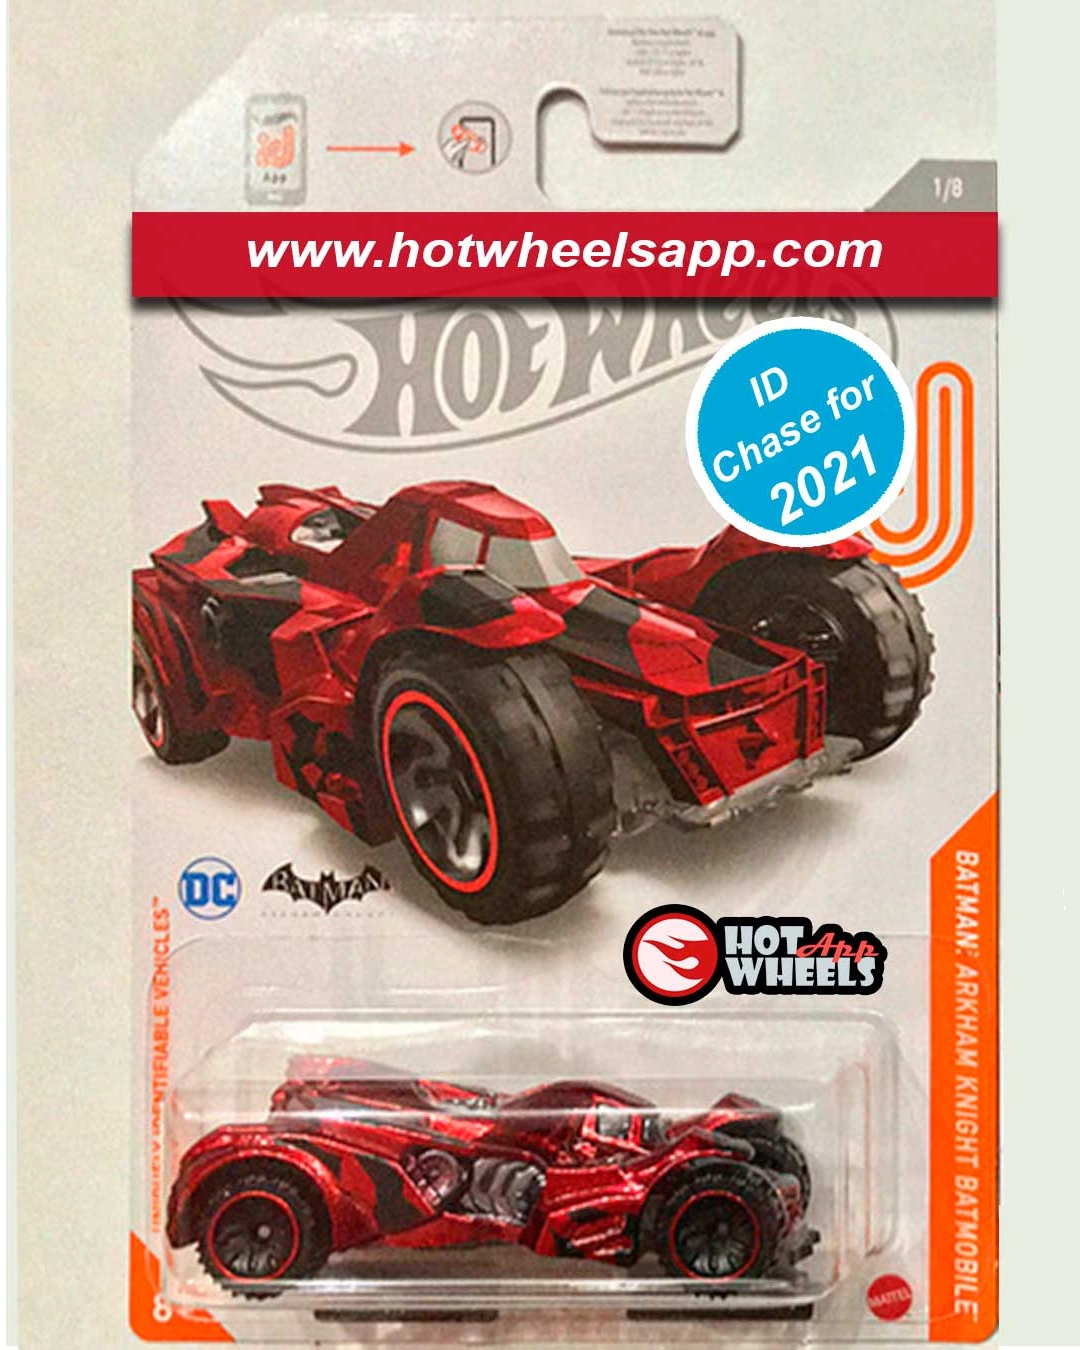 2021 Hot Wheels Arkham Batmobile ID Chase Twin Mill Factory Sealed Mainlines